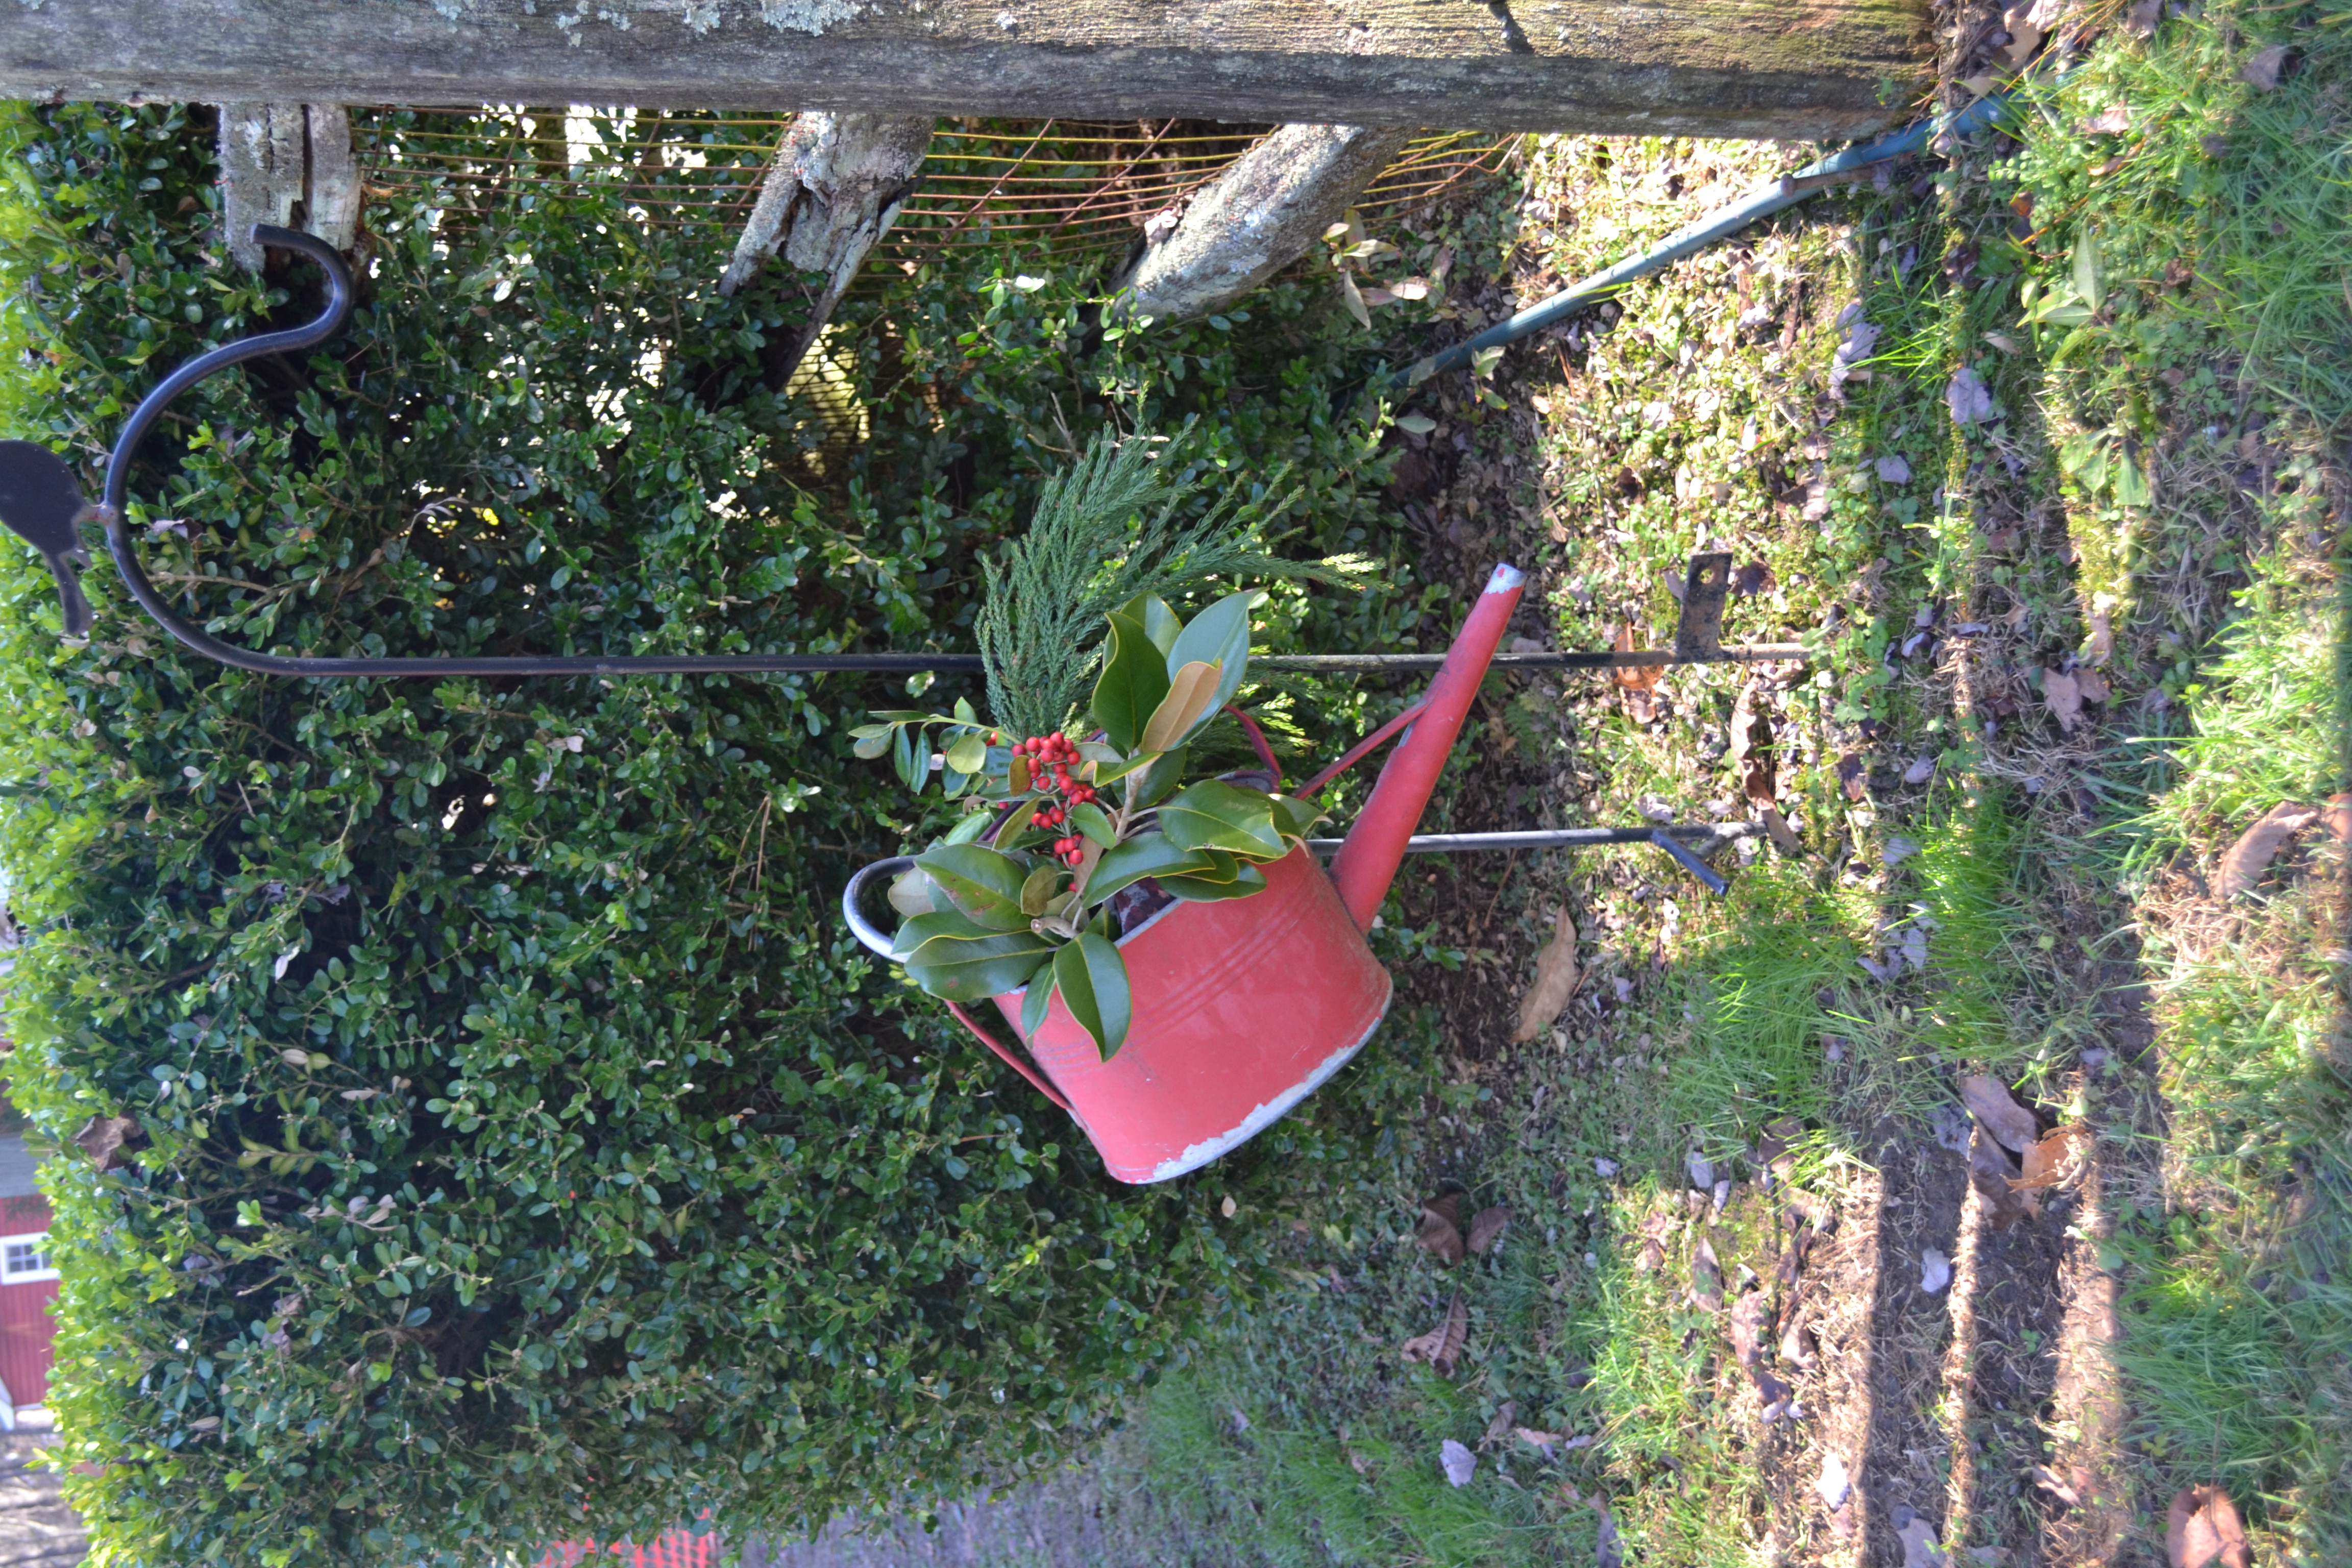 A Decorated Watering Can